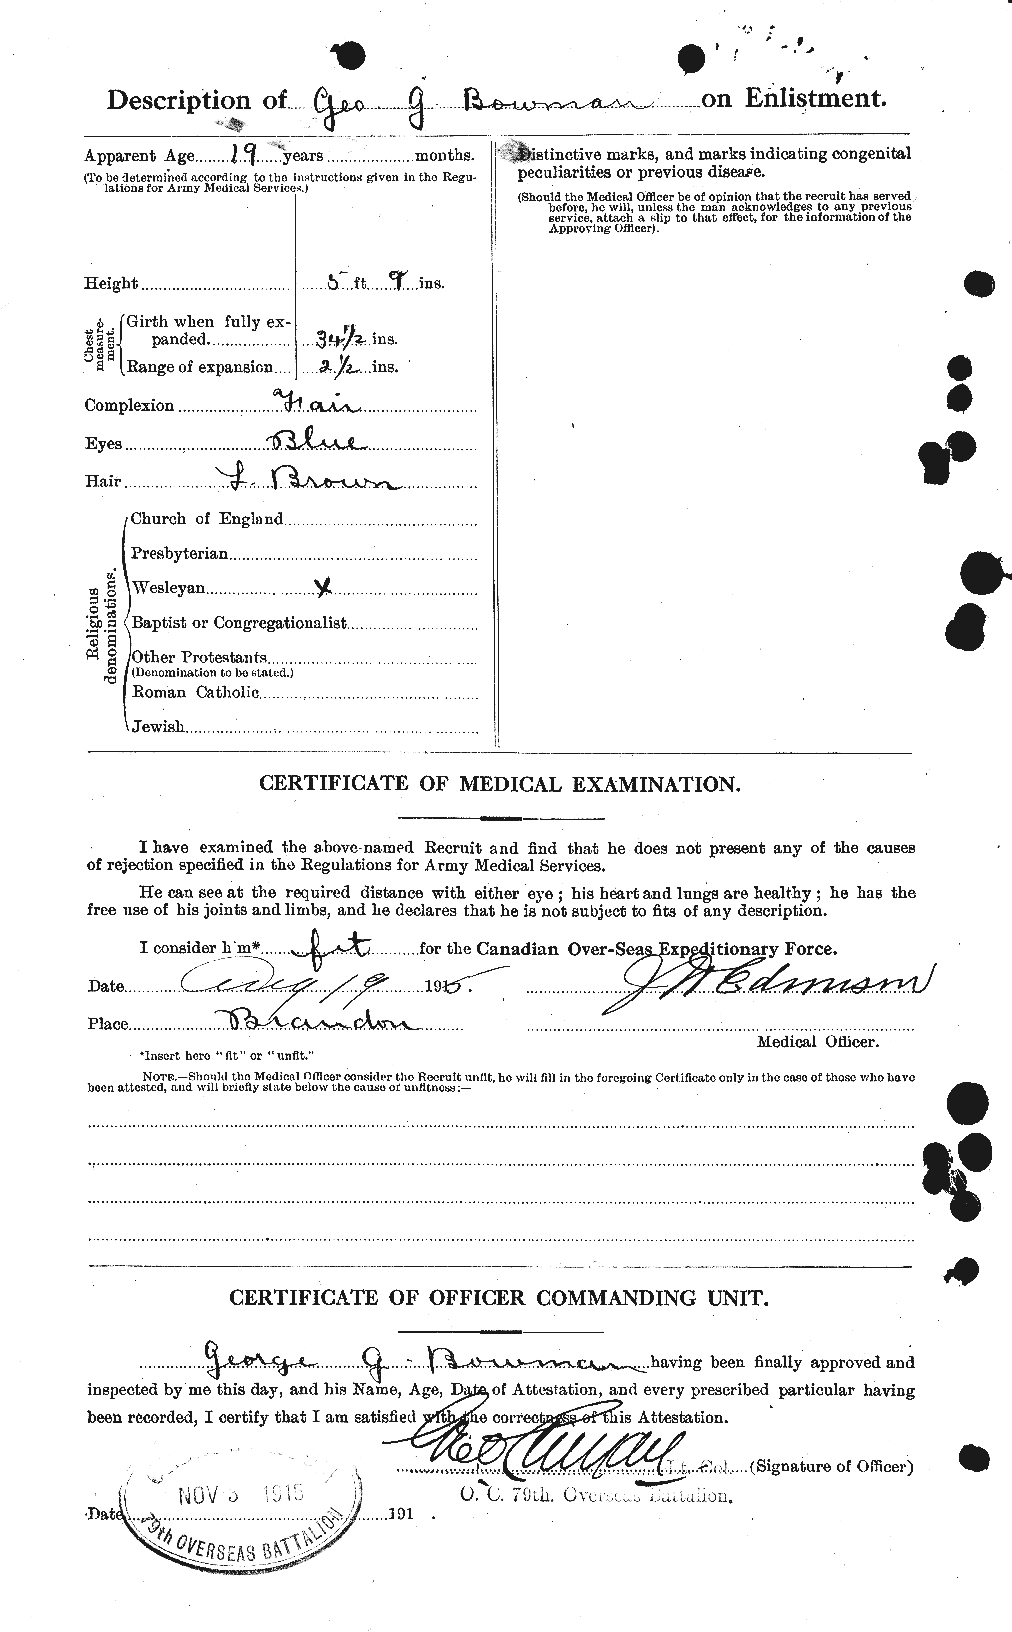 Personnel Records of the First World War - CEF 255059b